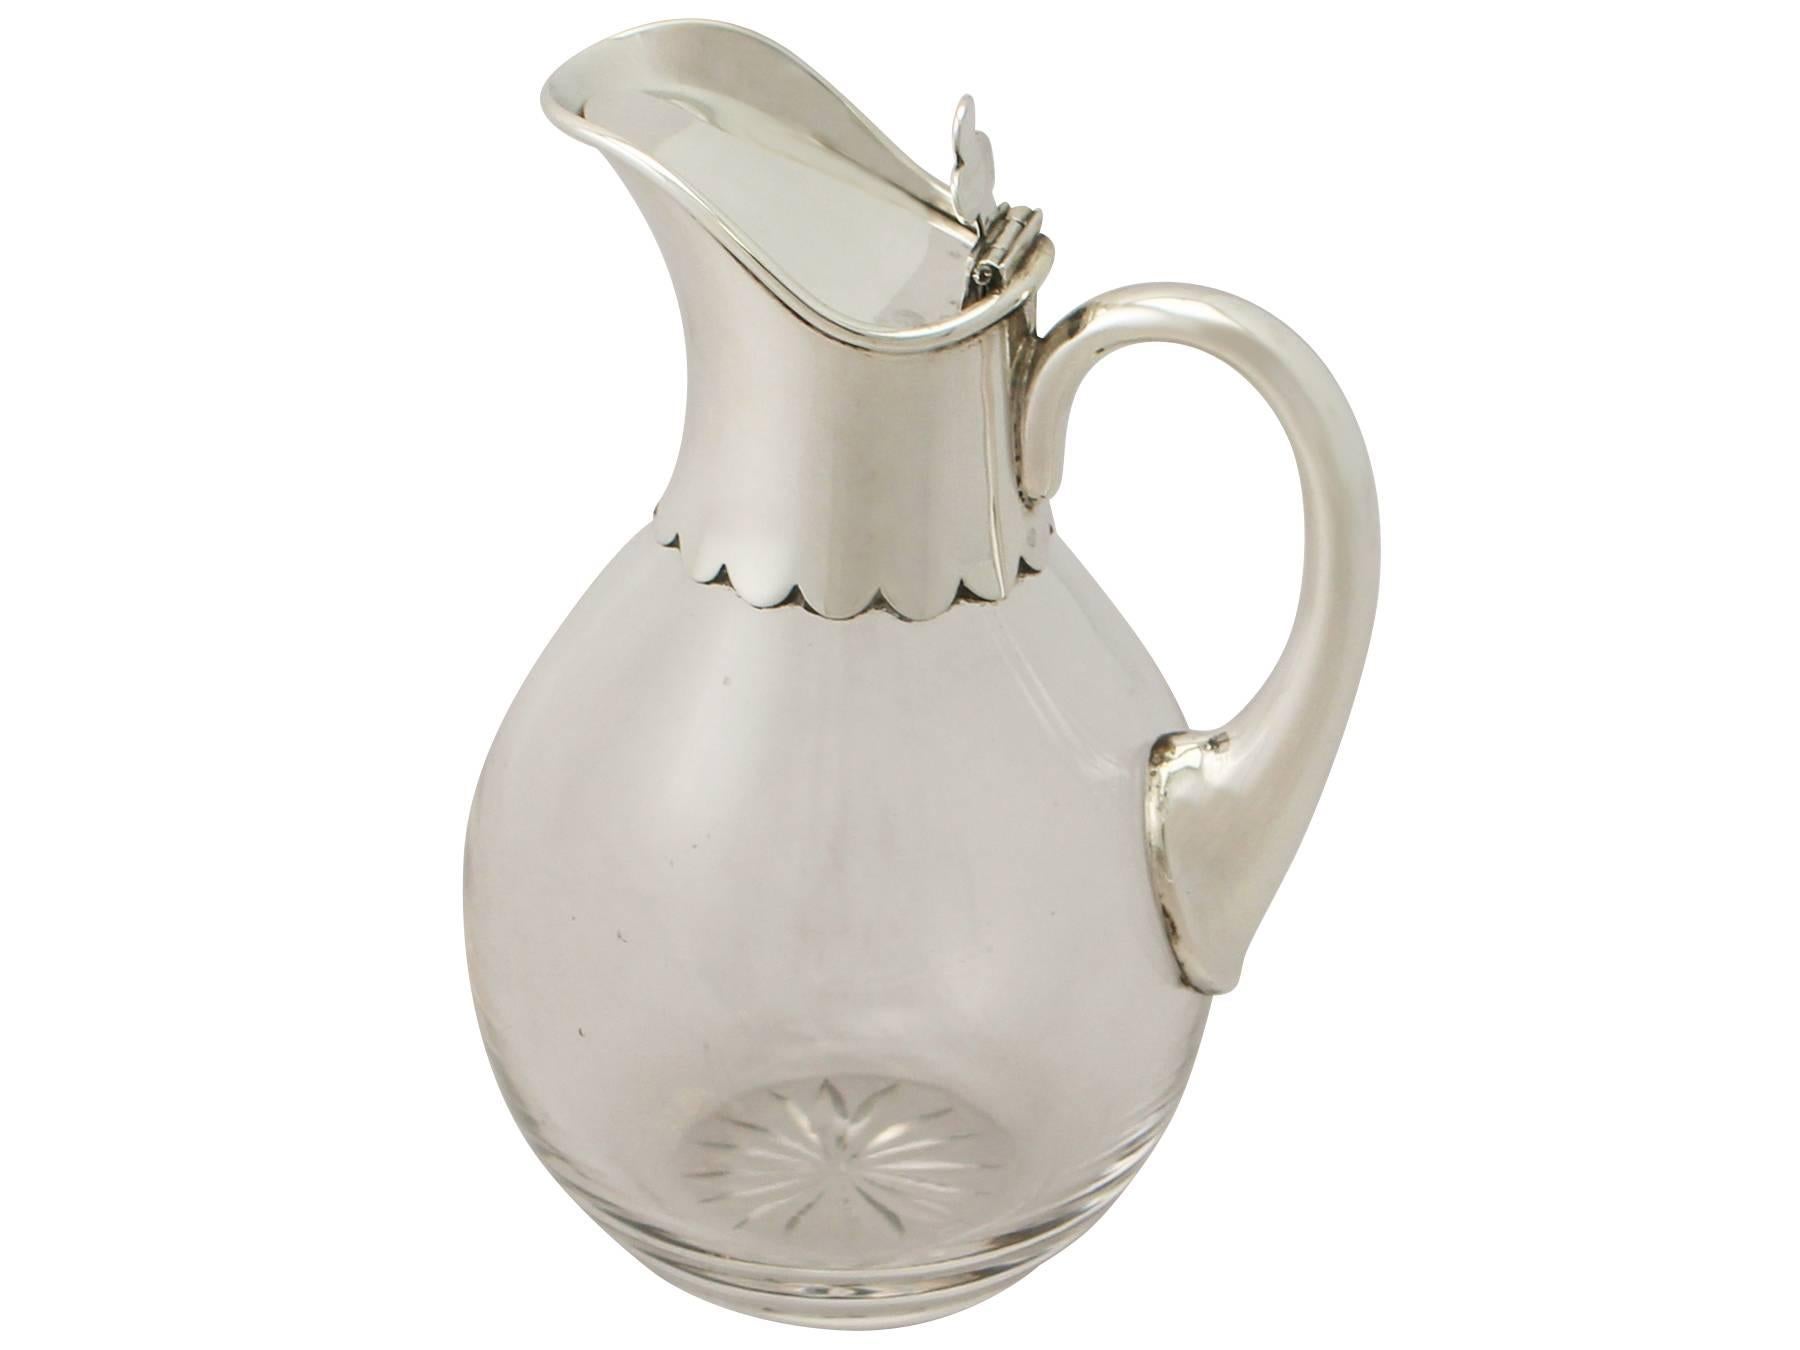 Glass and Sterling Silver Mounted Whiskey Jugs, Antique Edwardian 1